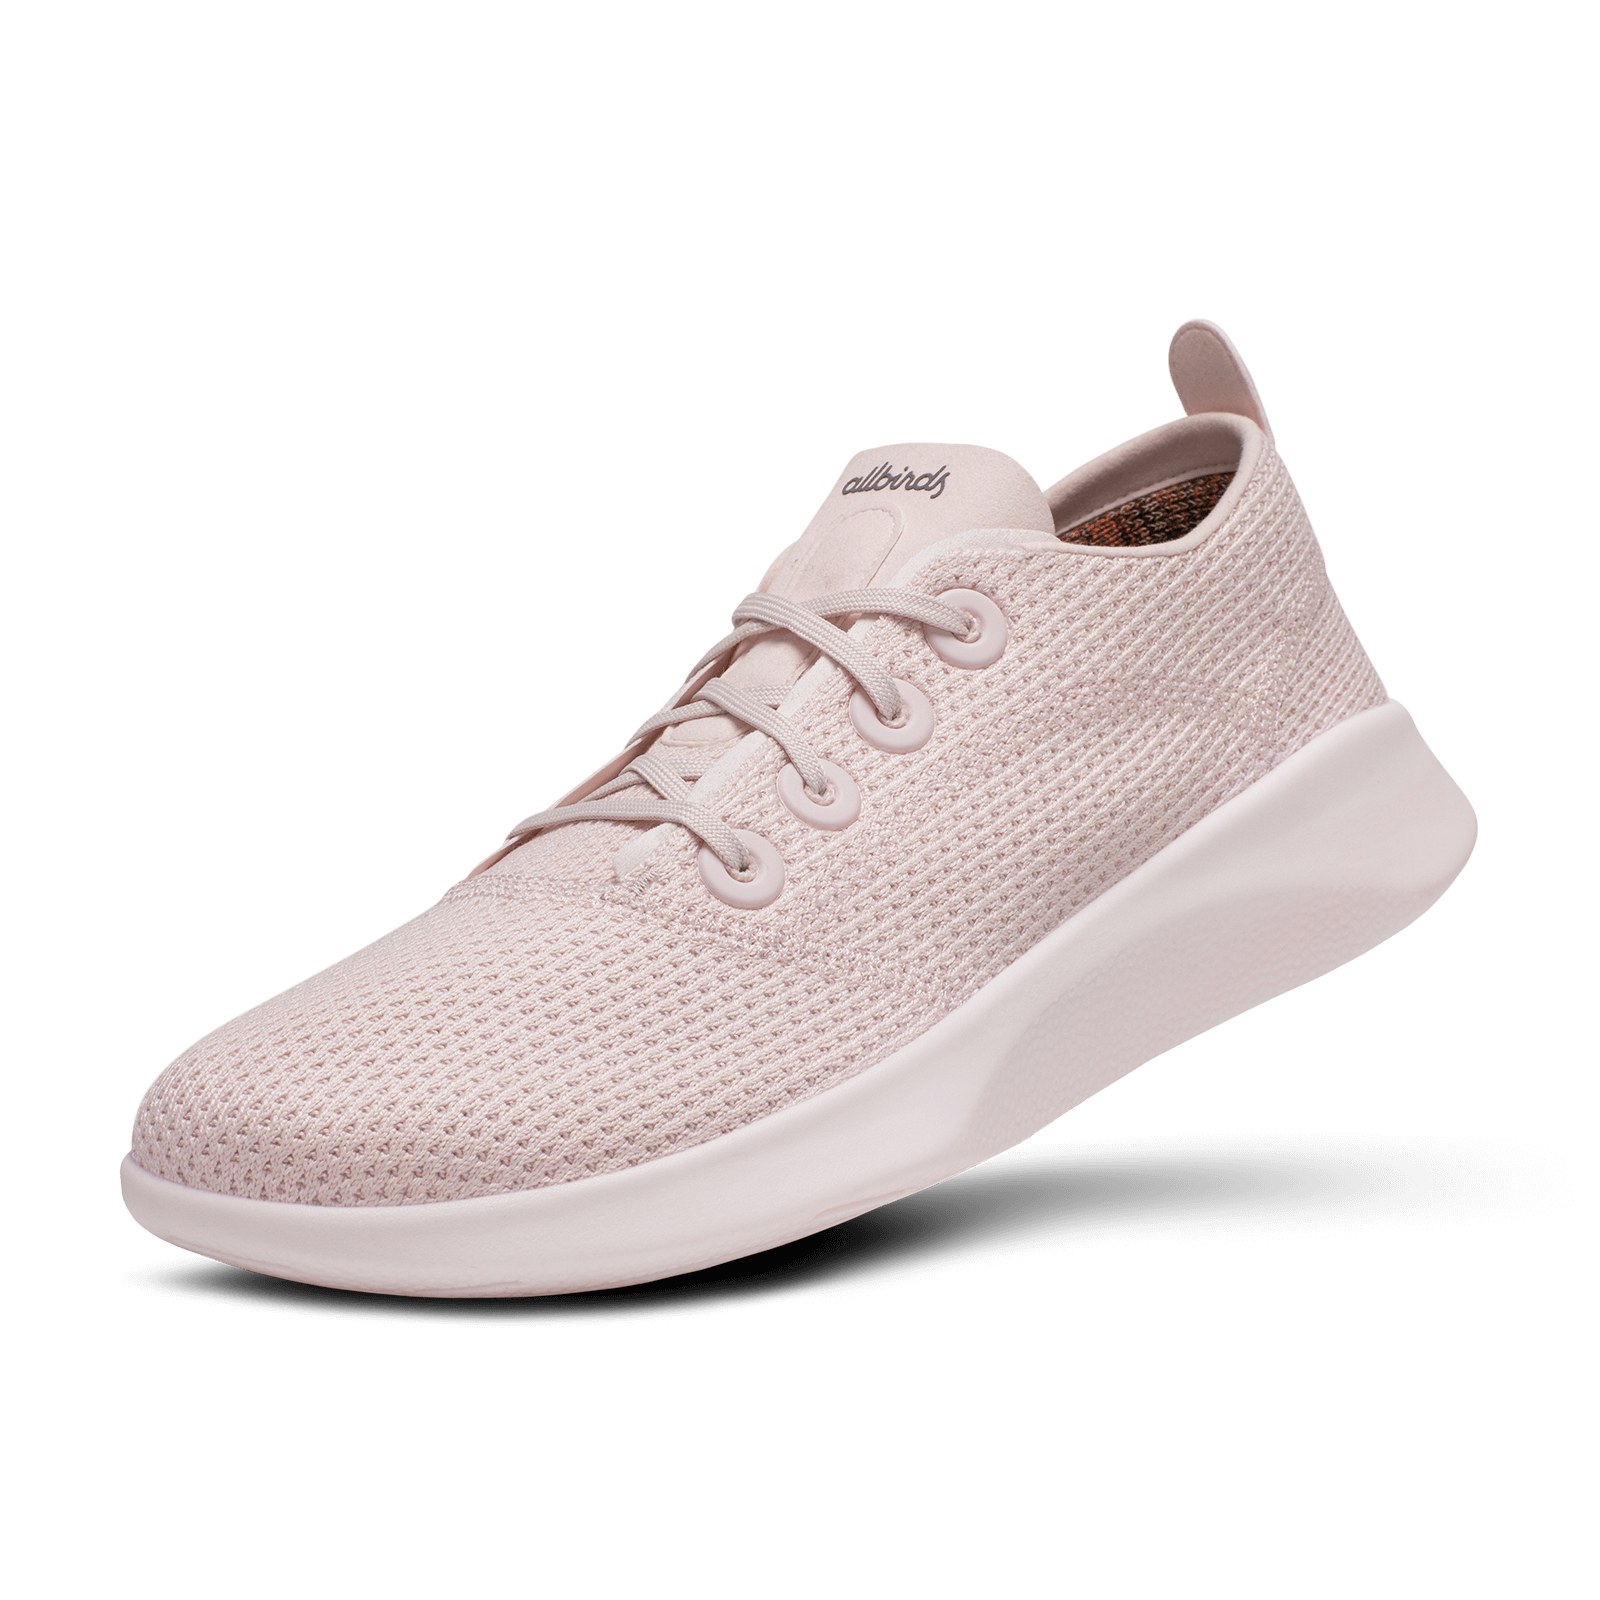 Women's SuperLight Tree Runners - Calm Taupe (Calm Taupe Sole)